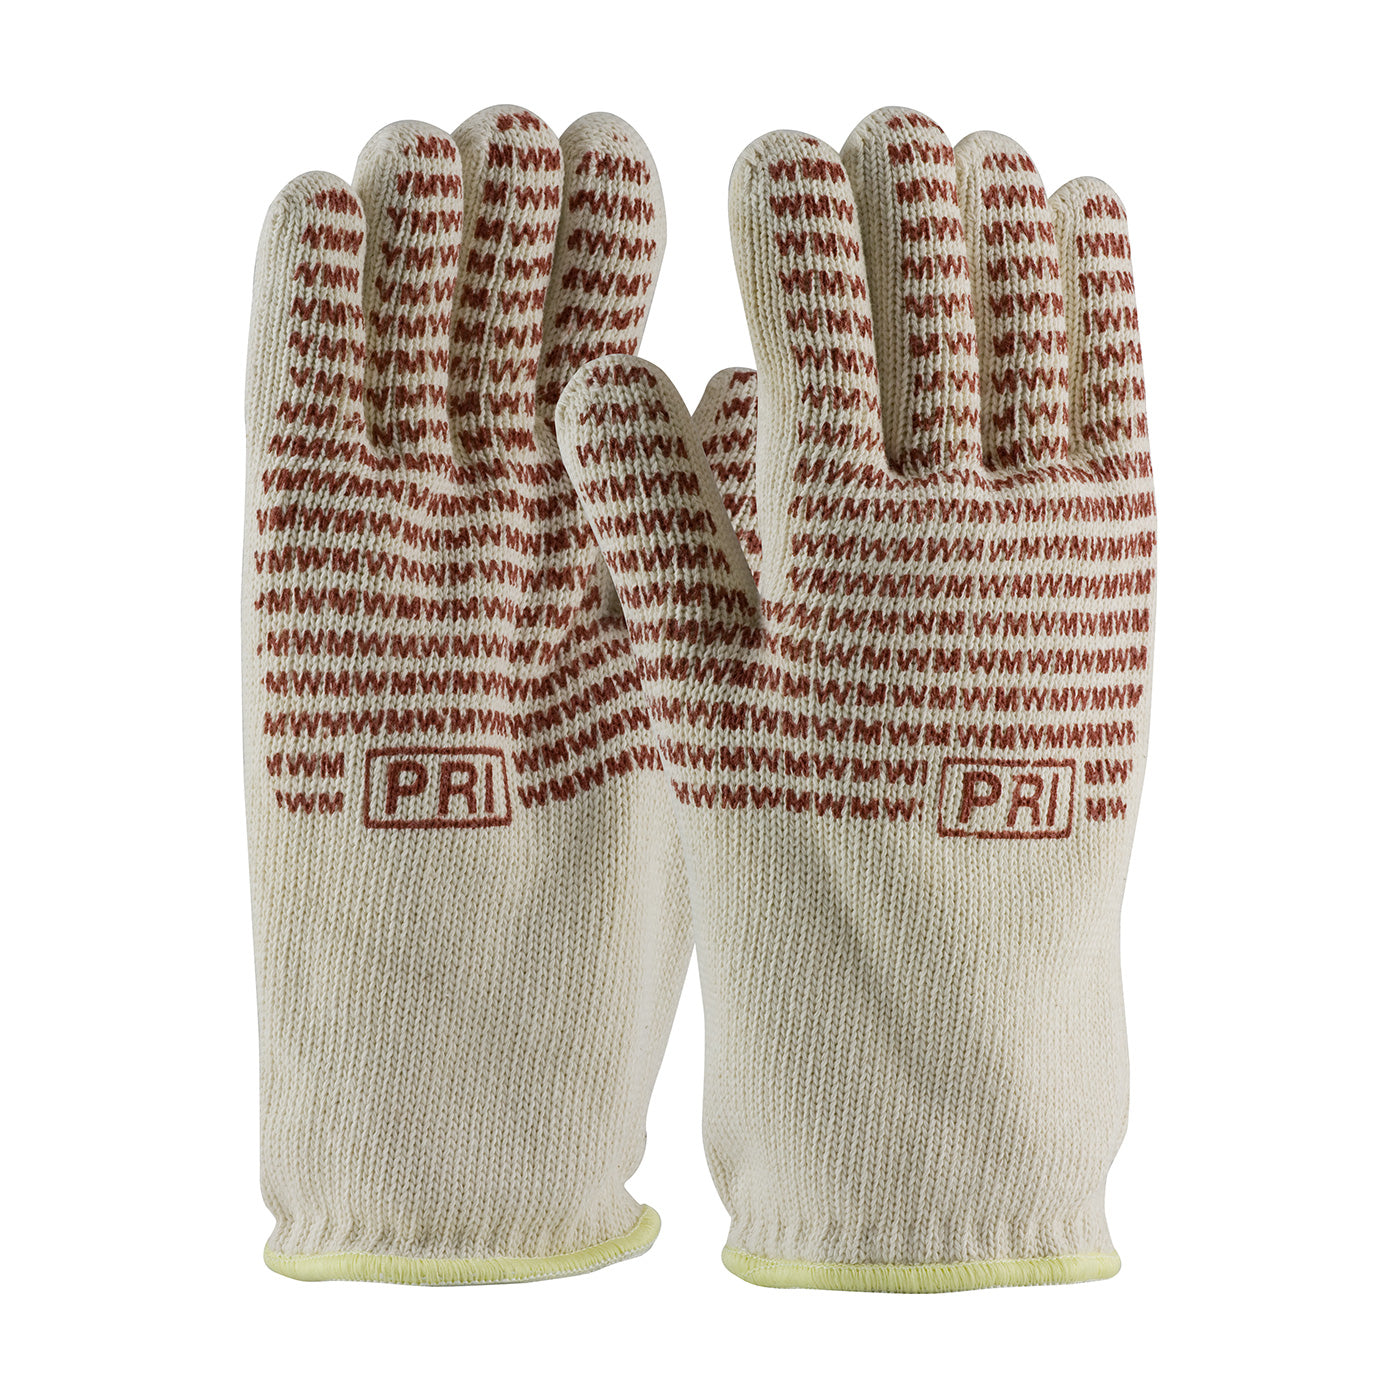 PIP 43-802L Double-Layered Cotton Seamless Knit Hot Mill Glove with Double-Sided EverGrip Nitrile Coating - 32 oz